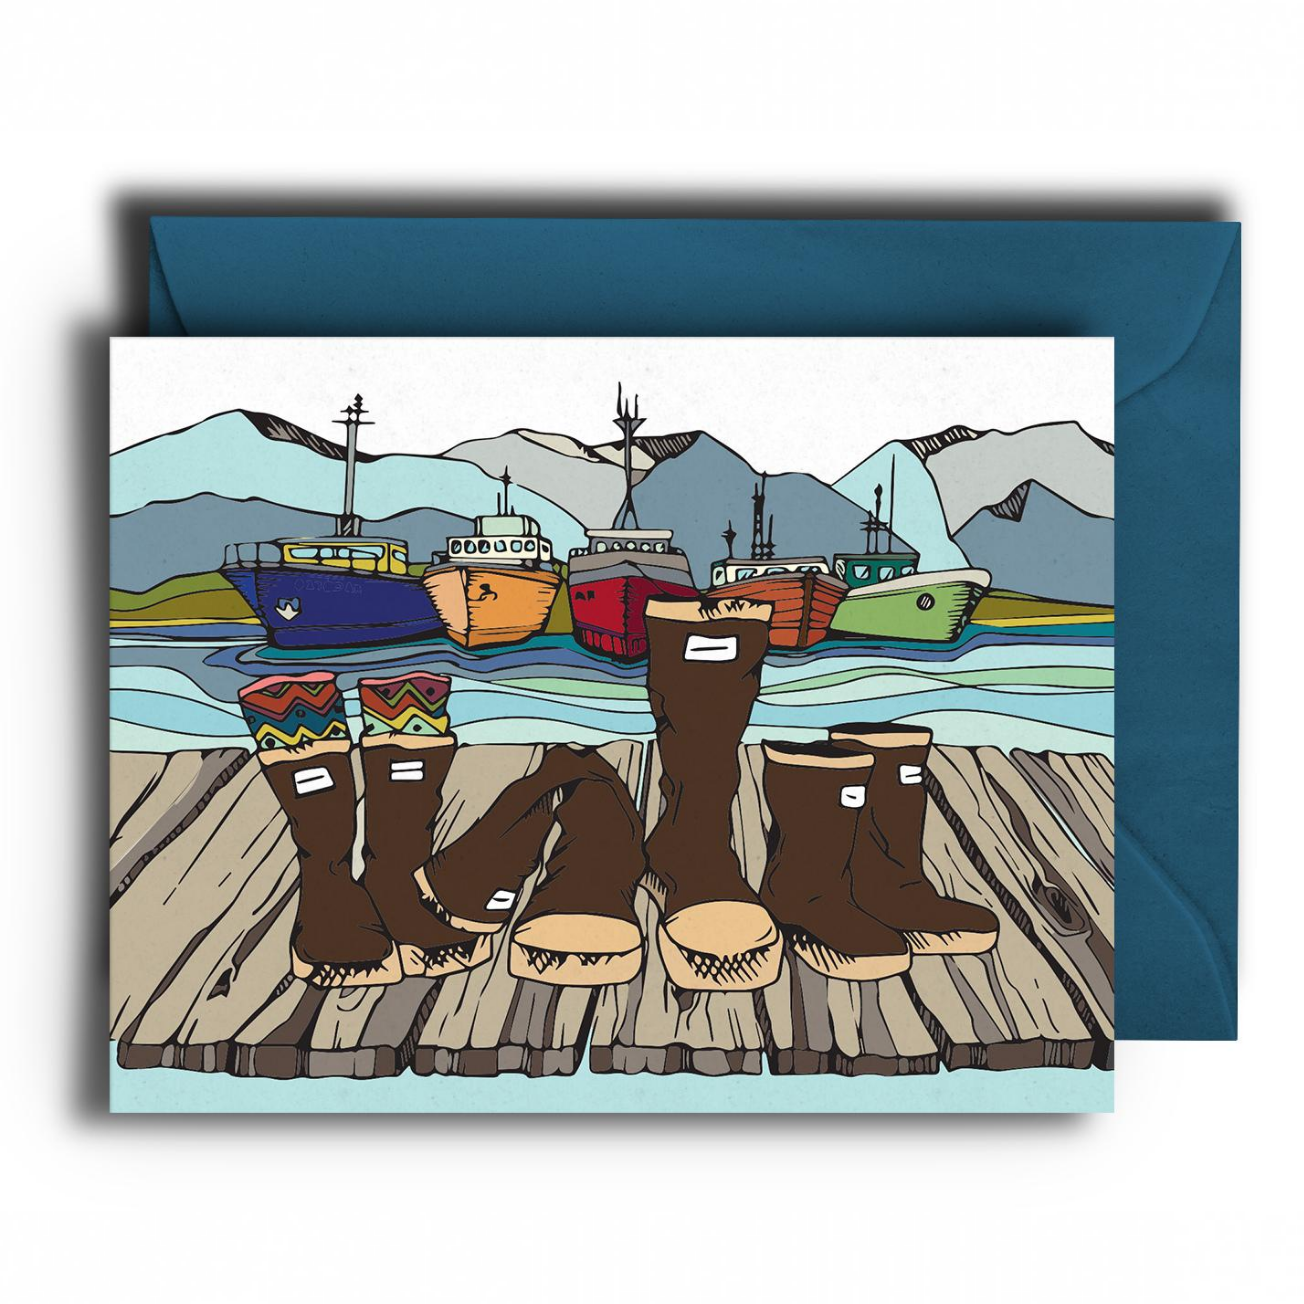 Boots and Boats - Notecard